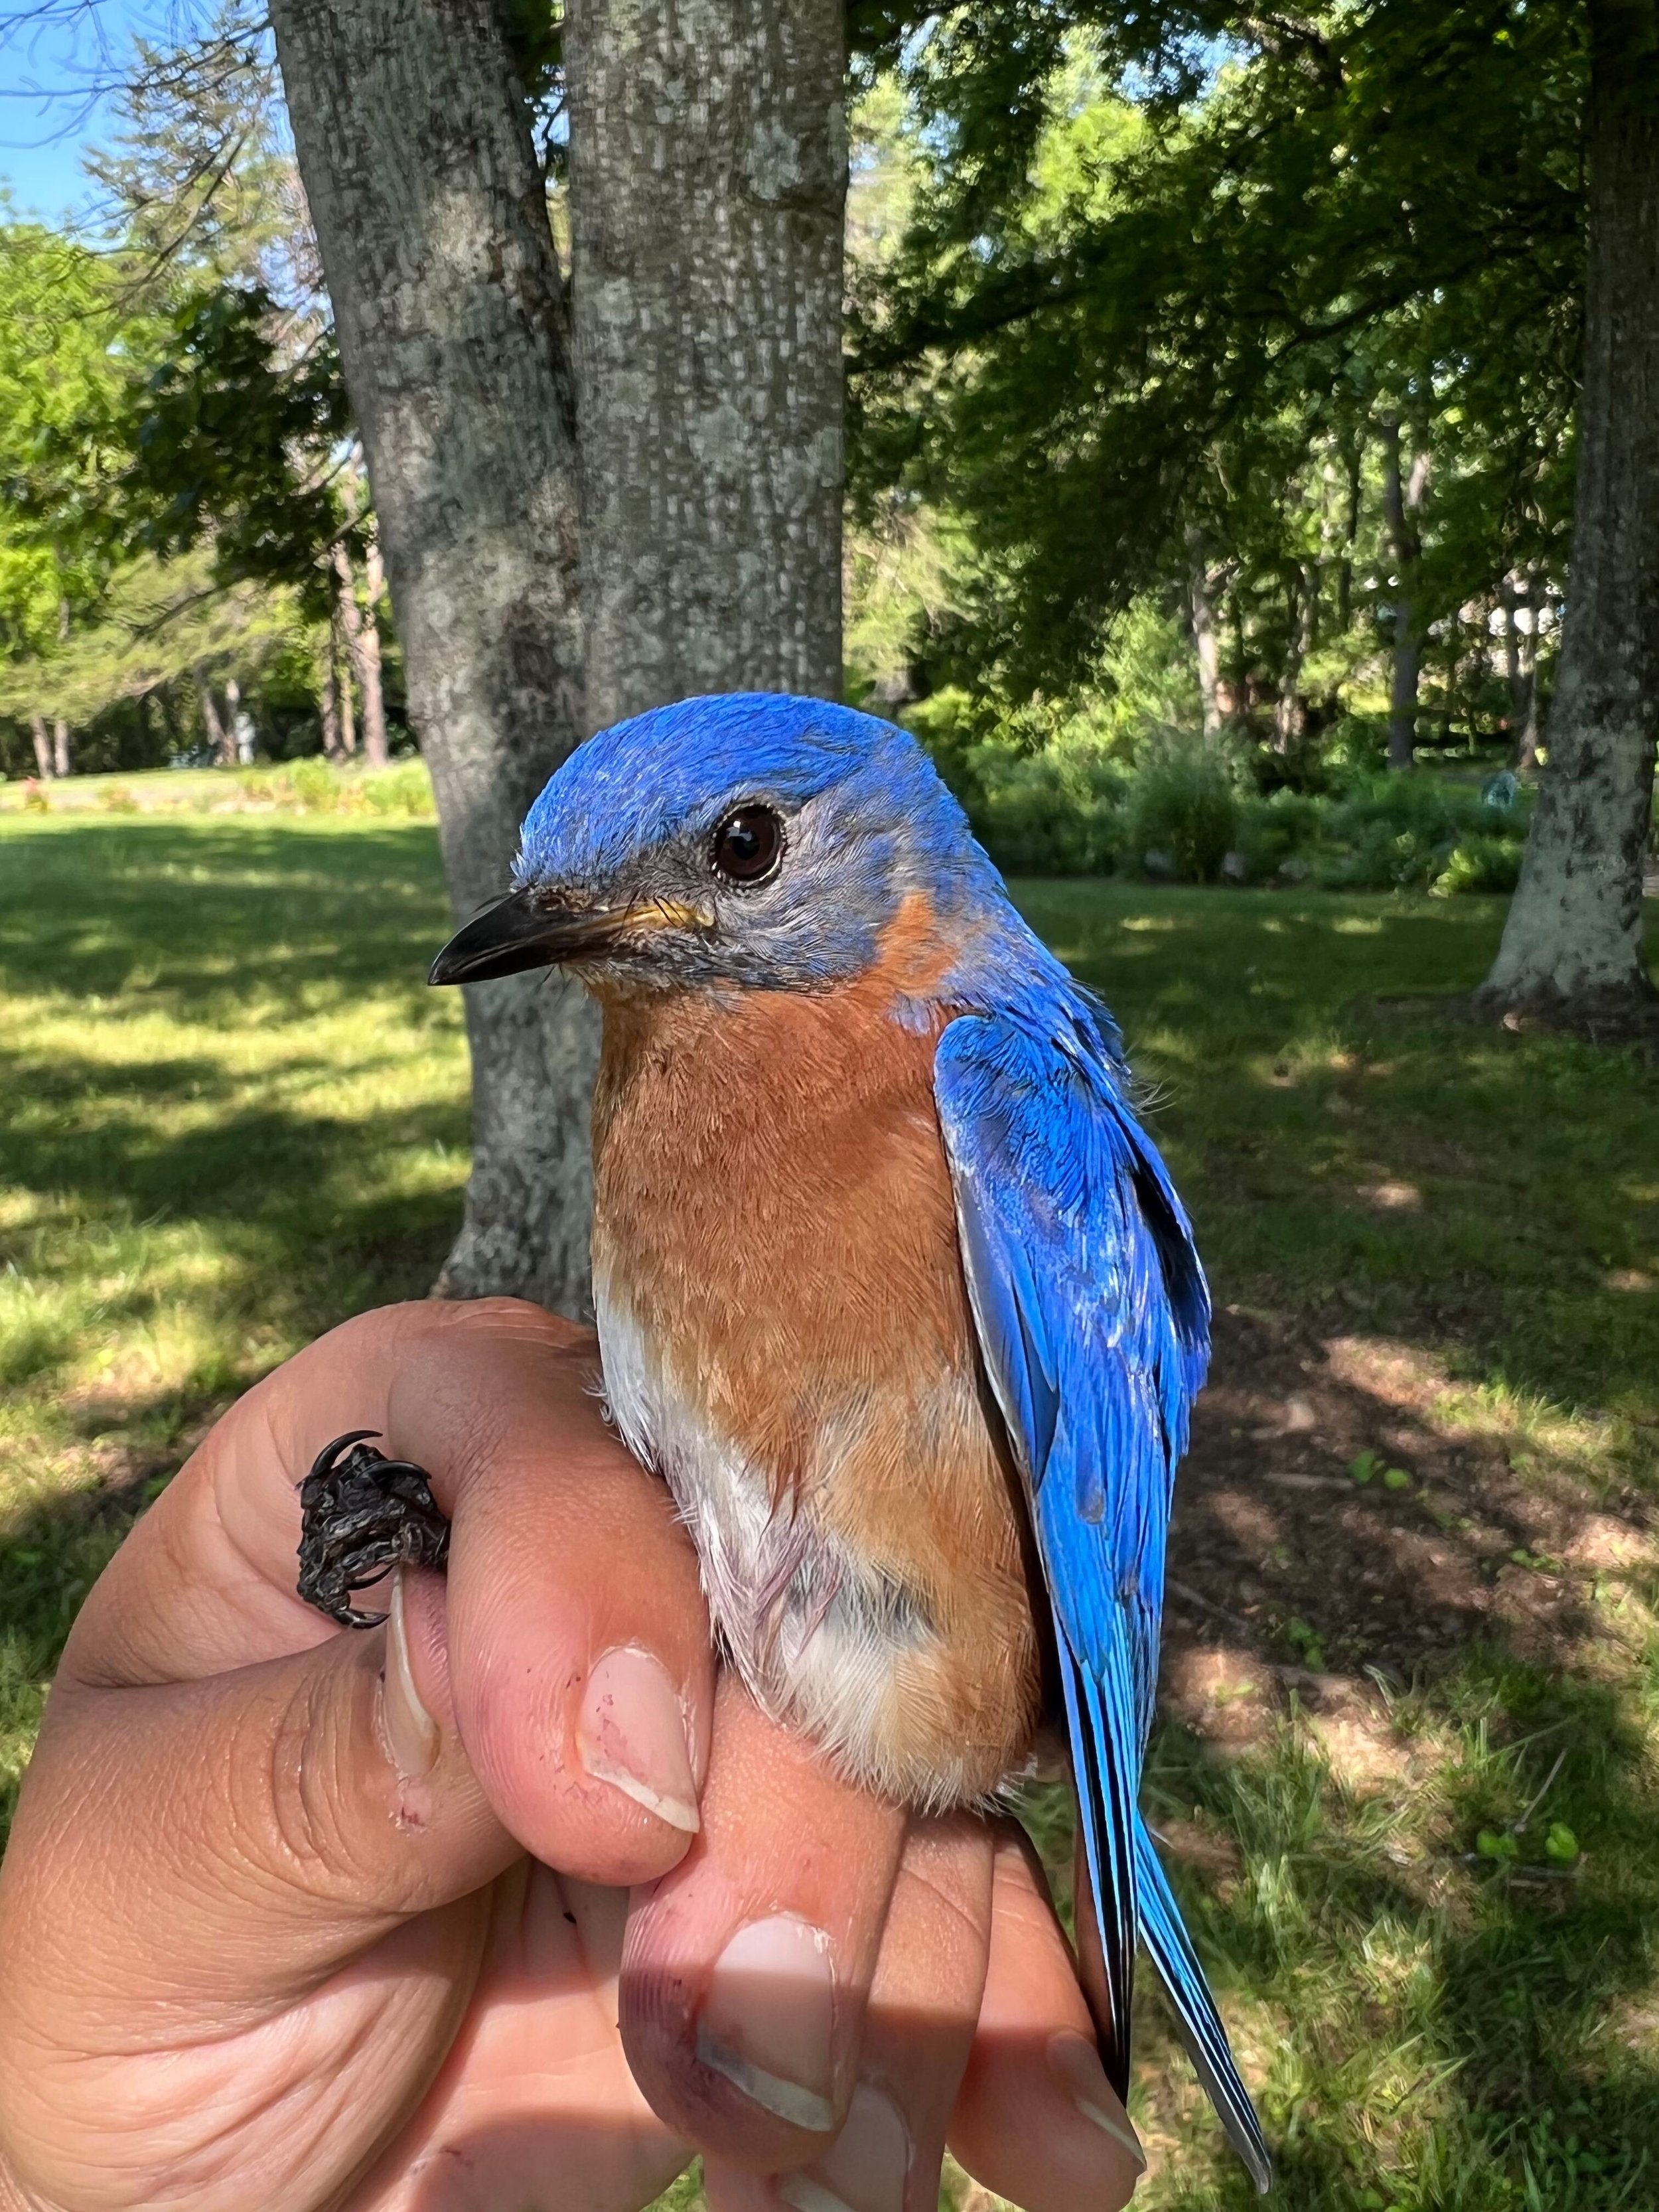  “The picture most closely related to my story and just taken this morning.&nbsp; In my story, I talk about this park with a big hill and having to extract this bluebird on my own, and how I felt after getting it out.&nbsp; This morning we set up net